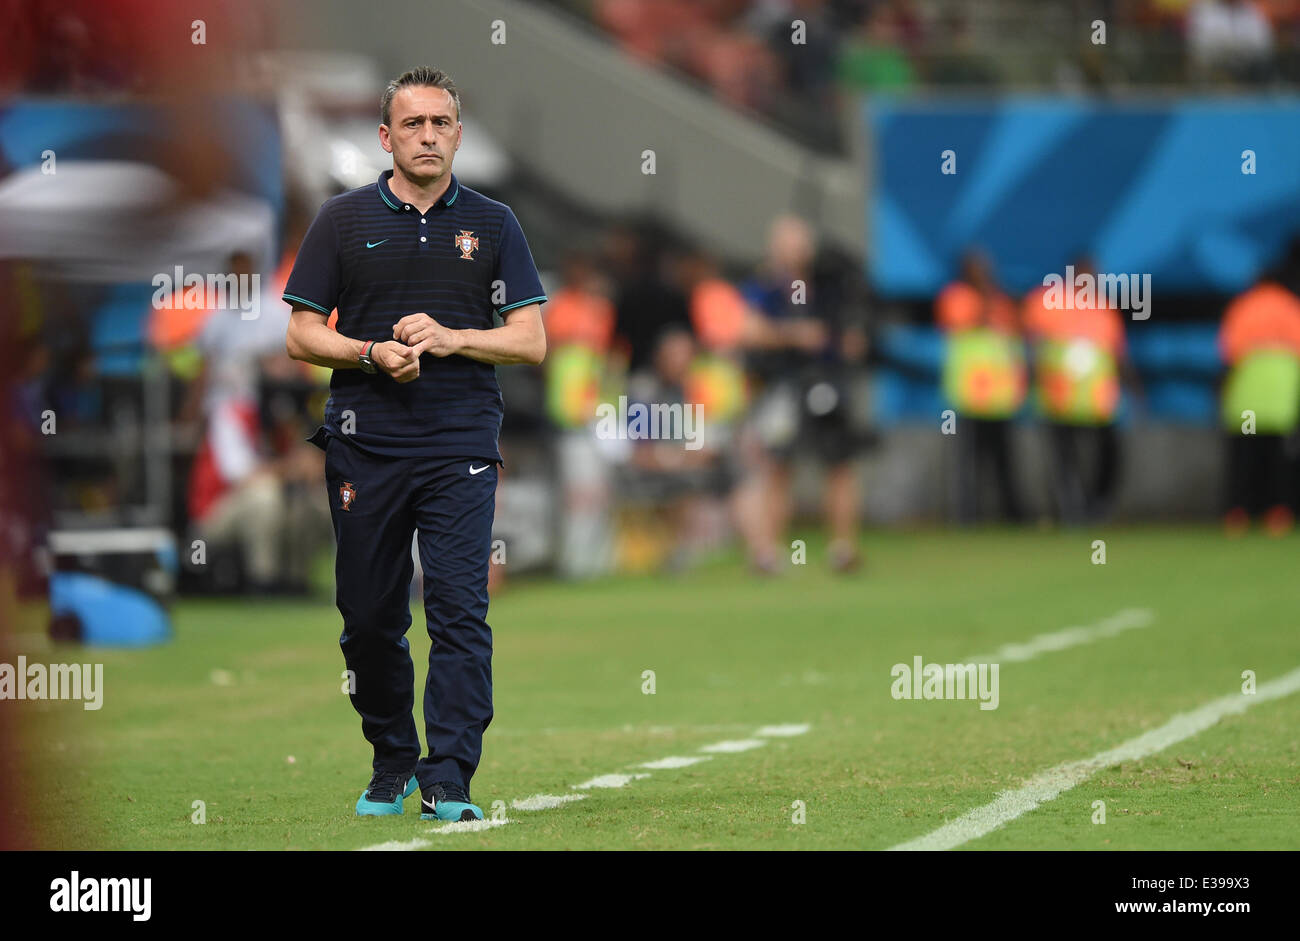 Manaus, Brazil. 22nd June, 2014. Head coach Paulo Bento of Portugal reacts during the FIFA World Cup 2014 group G preliminary round match between the USA and Portugal at the Arena Amazonia Stadium in Manaus, Brazil, 22 June 2014. Photo: Marius Becker/dpa/Alamy Live News Stock Photo